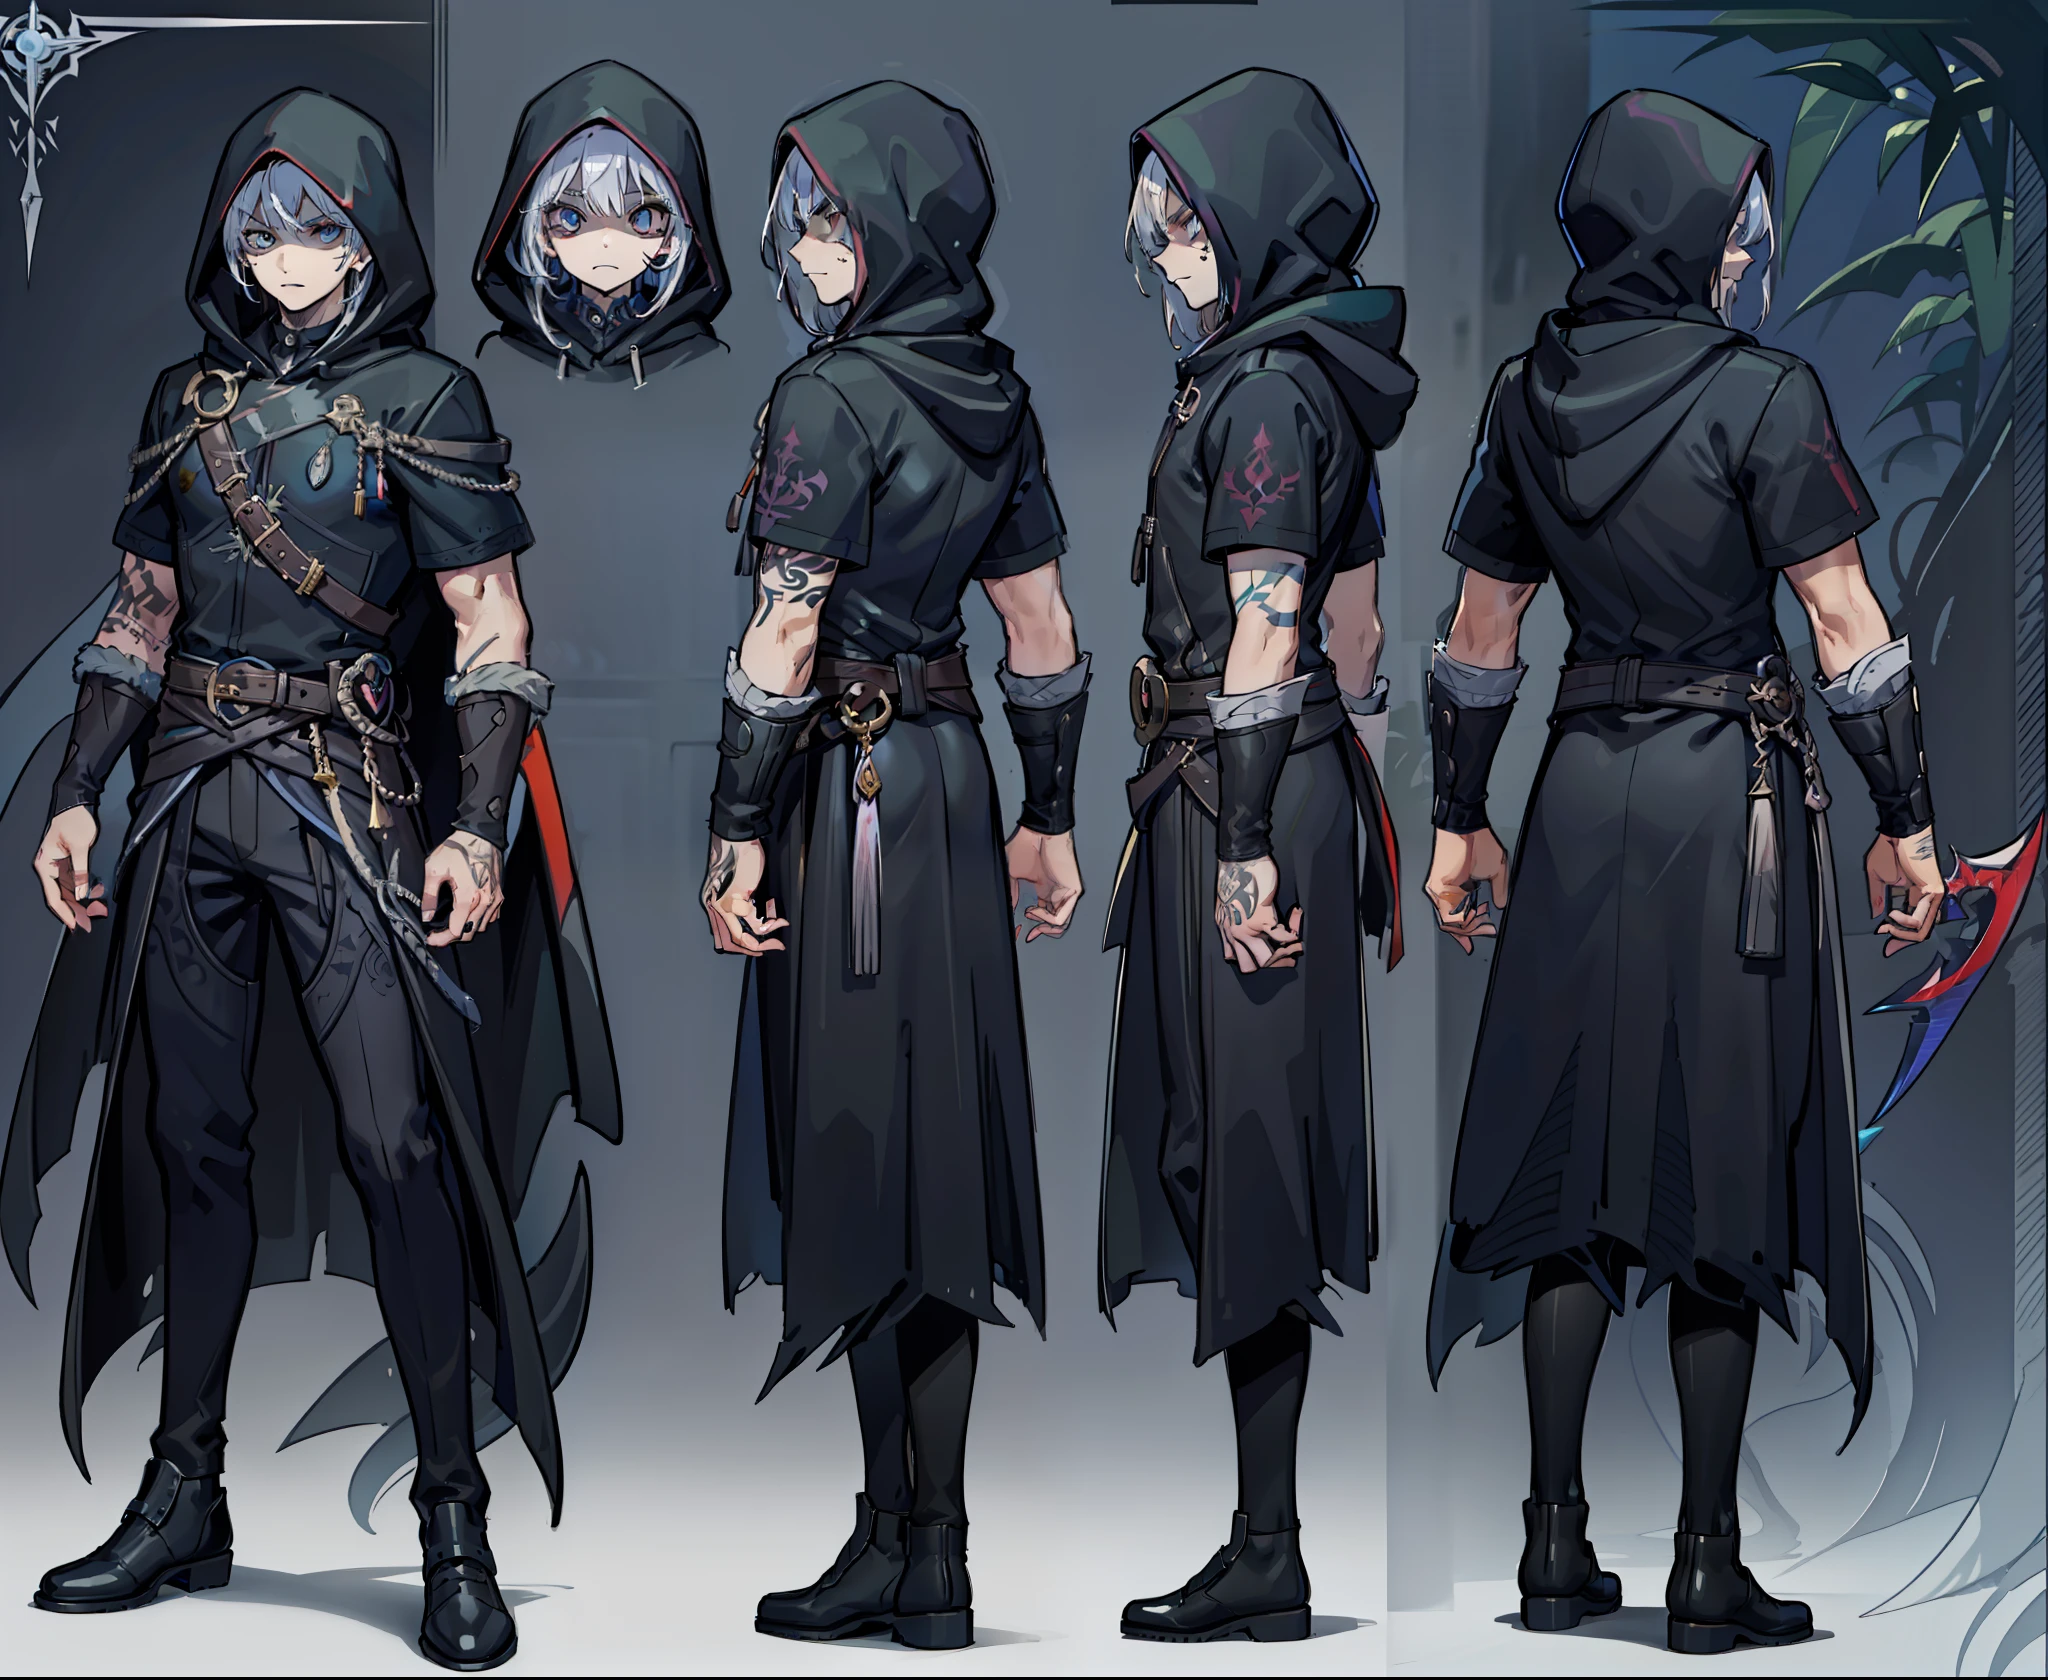 1man, reference sheet, matching outfit, (fantasy character design, front, back, sides, left, right, up, down) Hooded Mysterious Man. Sharp features, piercing eyes. Distinctive tattoo of a serpent entwined with a sword on his right cheek. Wearing a dark cloak, concealing his identity. (masterpiece:1.2), (best quality:1.3).